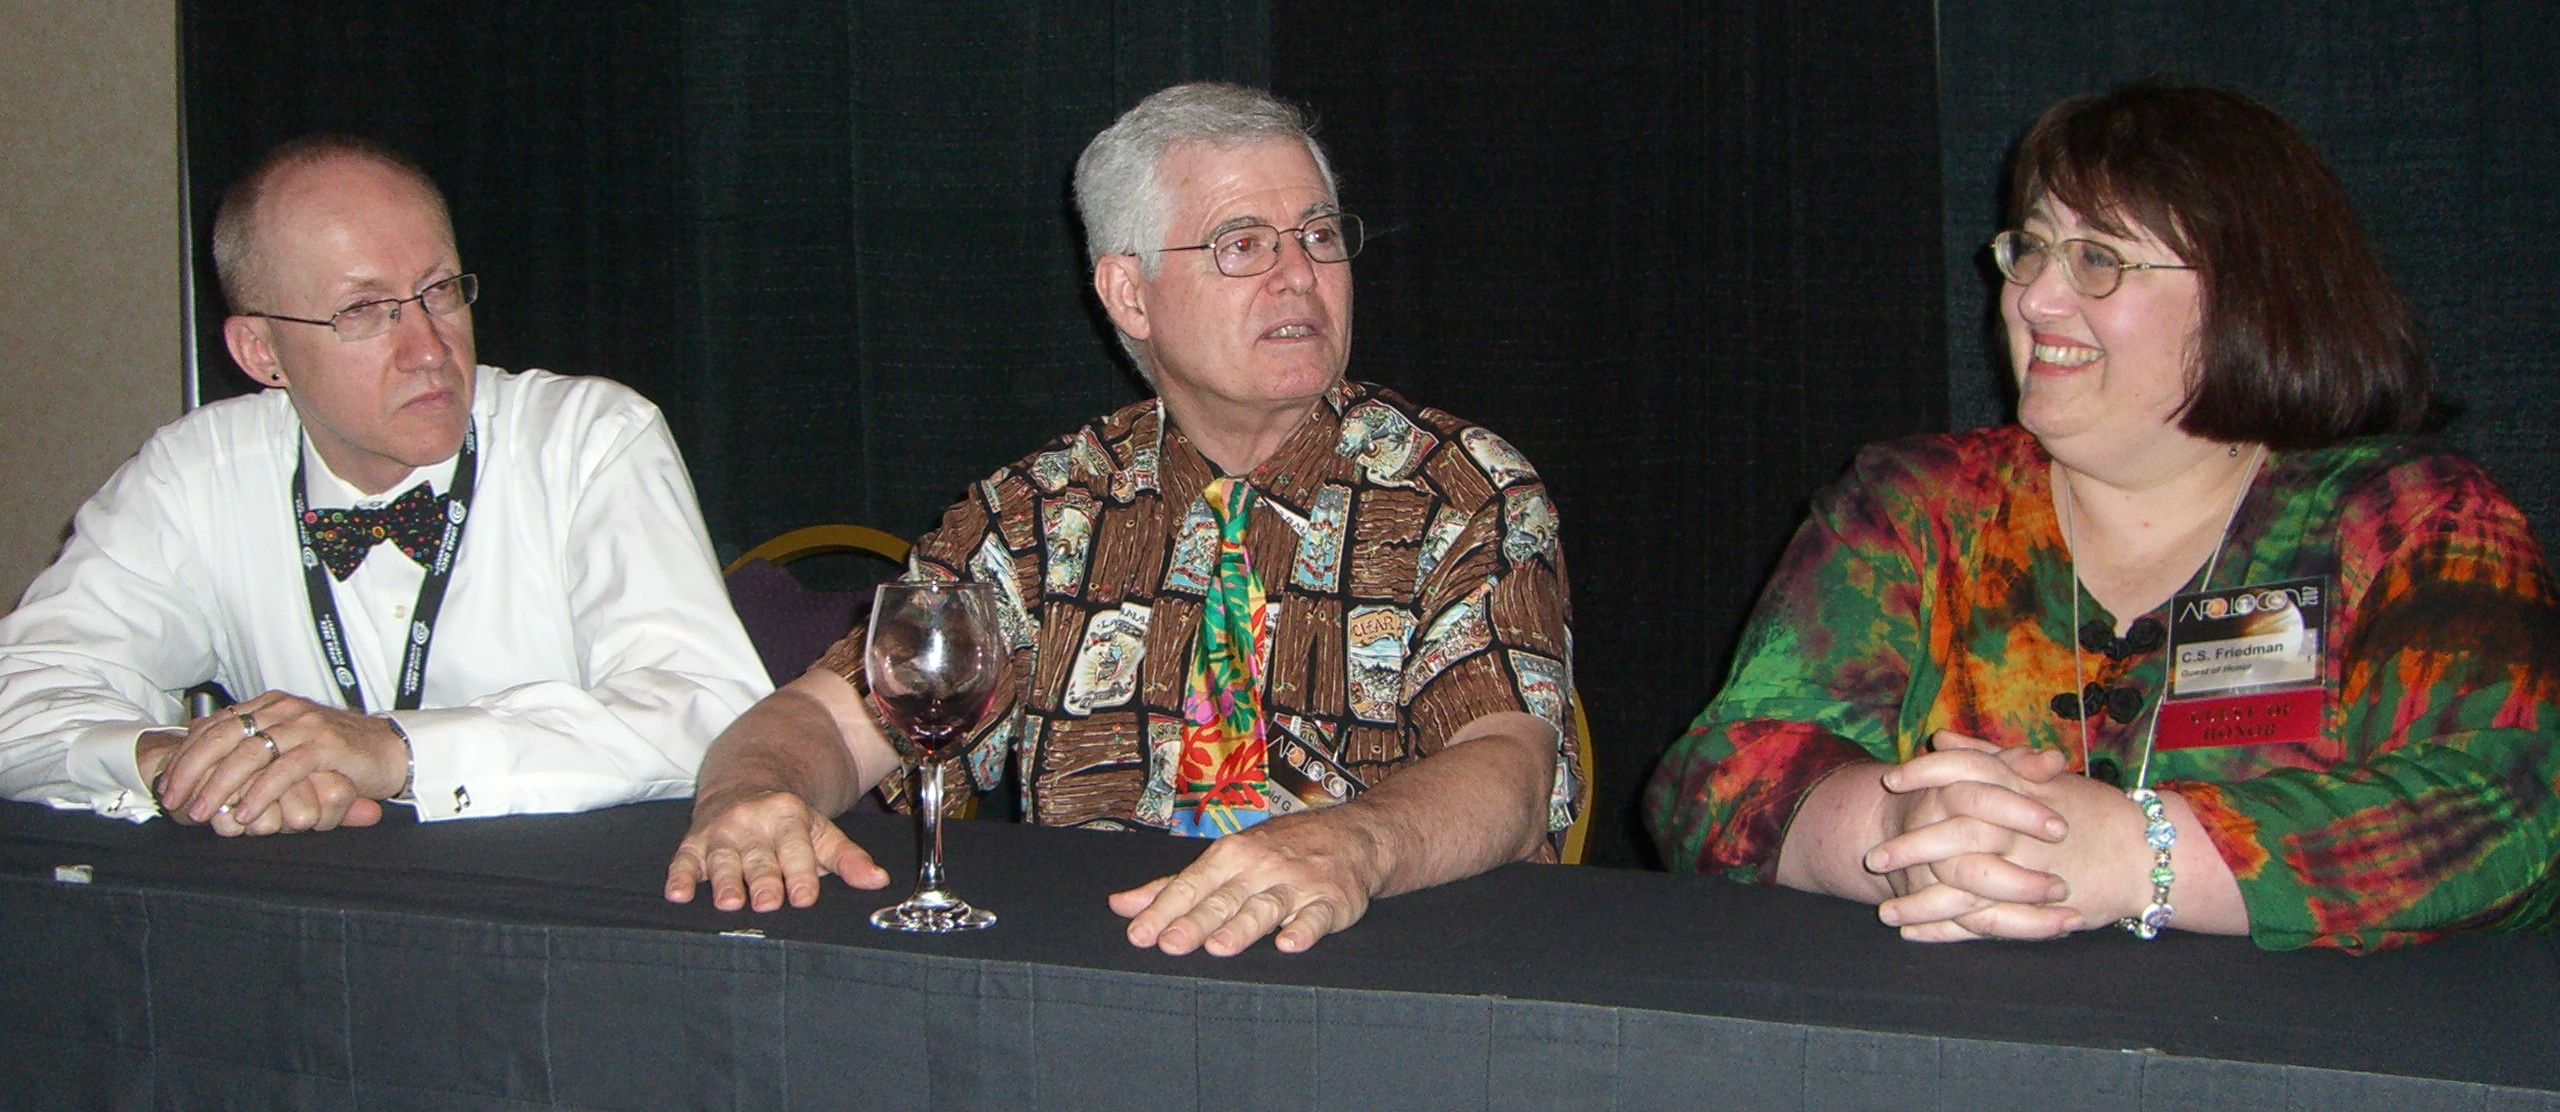 ApolloCon 2007 opening ceremony: organizer Mark Hall, editor Guest of Honor David Hartwell, and writer Guest of Honor C. S. Friedman